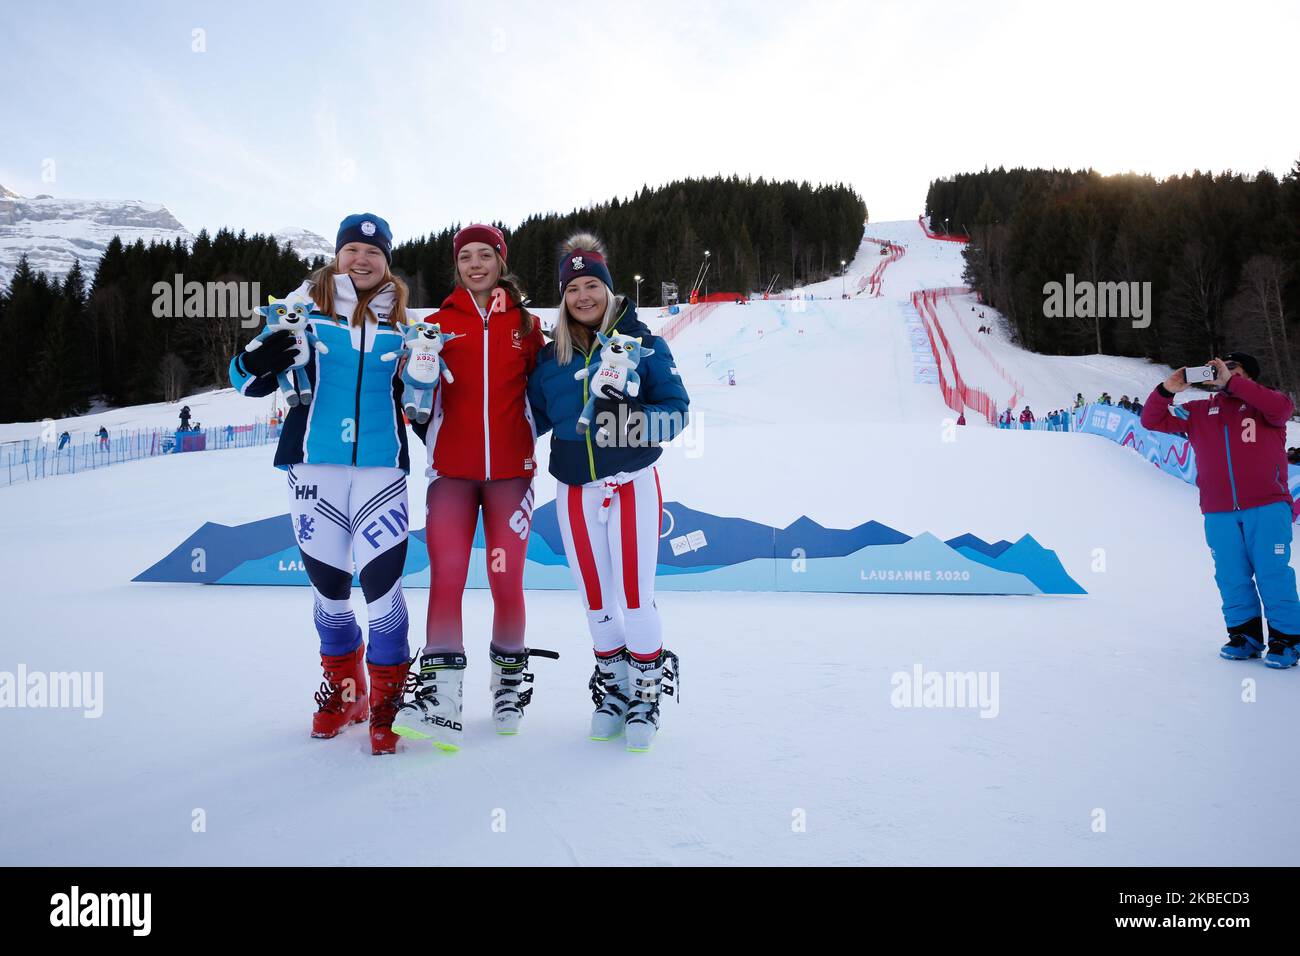 (from lest) Rosa POHJOLAINEN from Finland (second place), Amerie KLOPFENSTEIN from Switzerland (first place) and Amanda SALZGEBER from Austria (third place) on a podium during a mascot ceremony after Woman's Giant Slalom during Winter Youth Olympic Games Lausanne 2020 in Les Diablerets, Switzerland on January 12, 2020. (Photo by Dominika Zarzycka/NurPhoto) Stock Photo